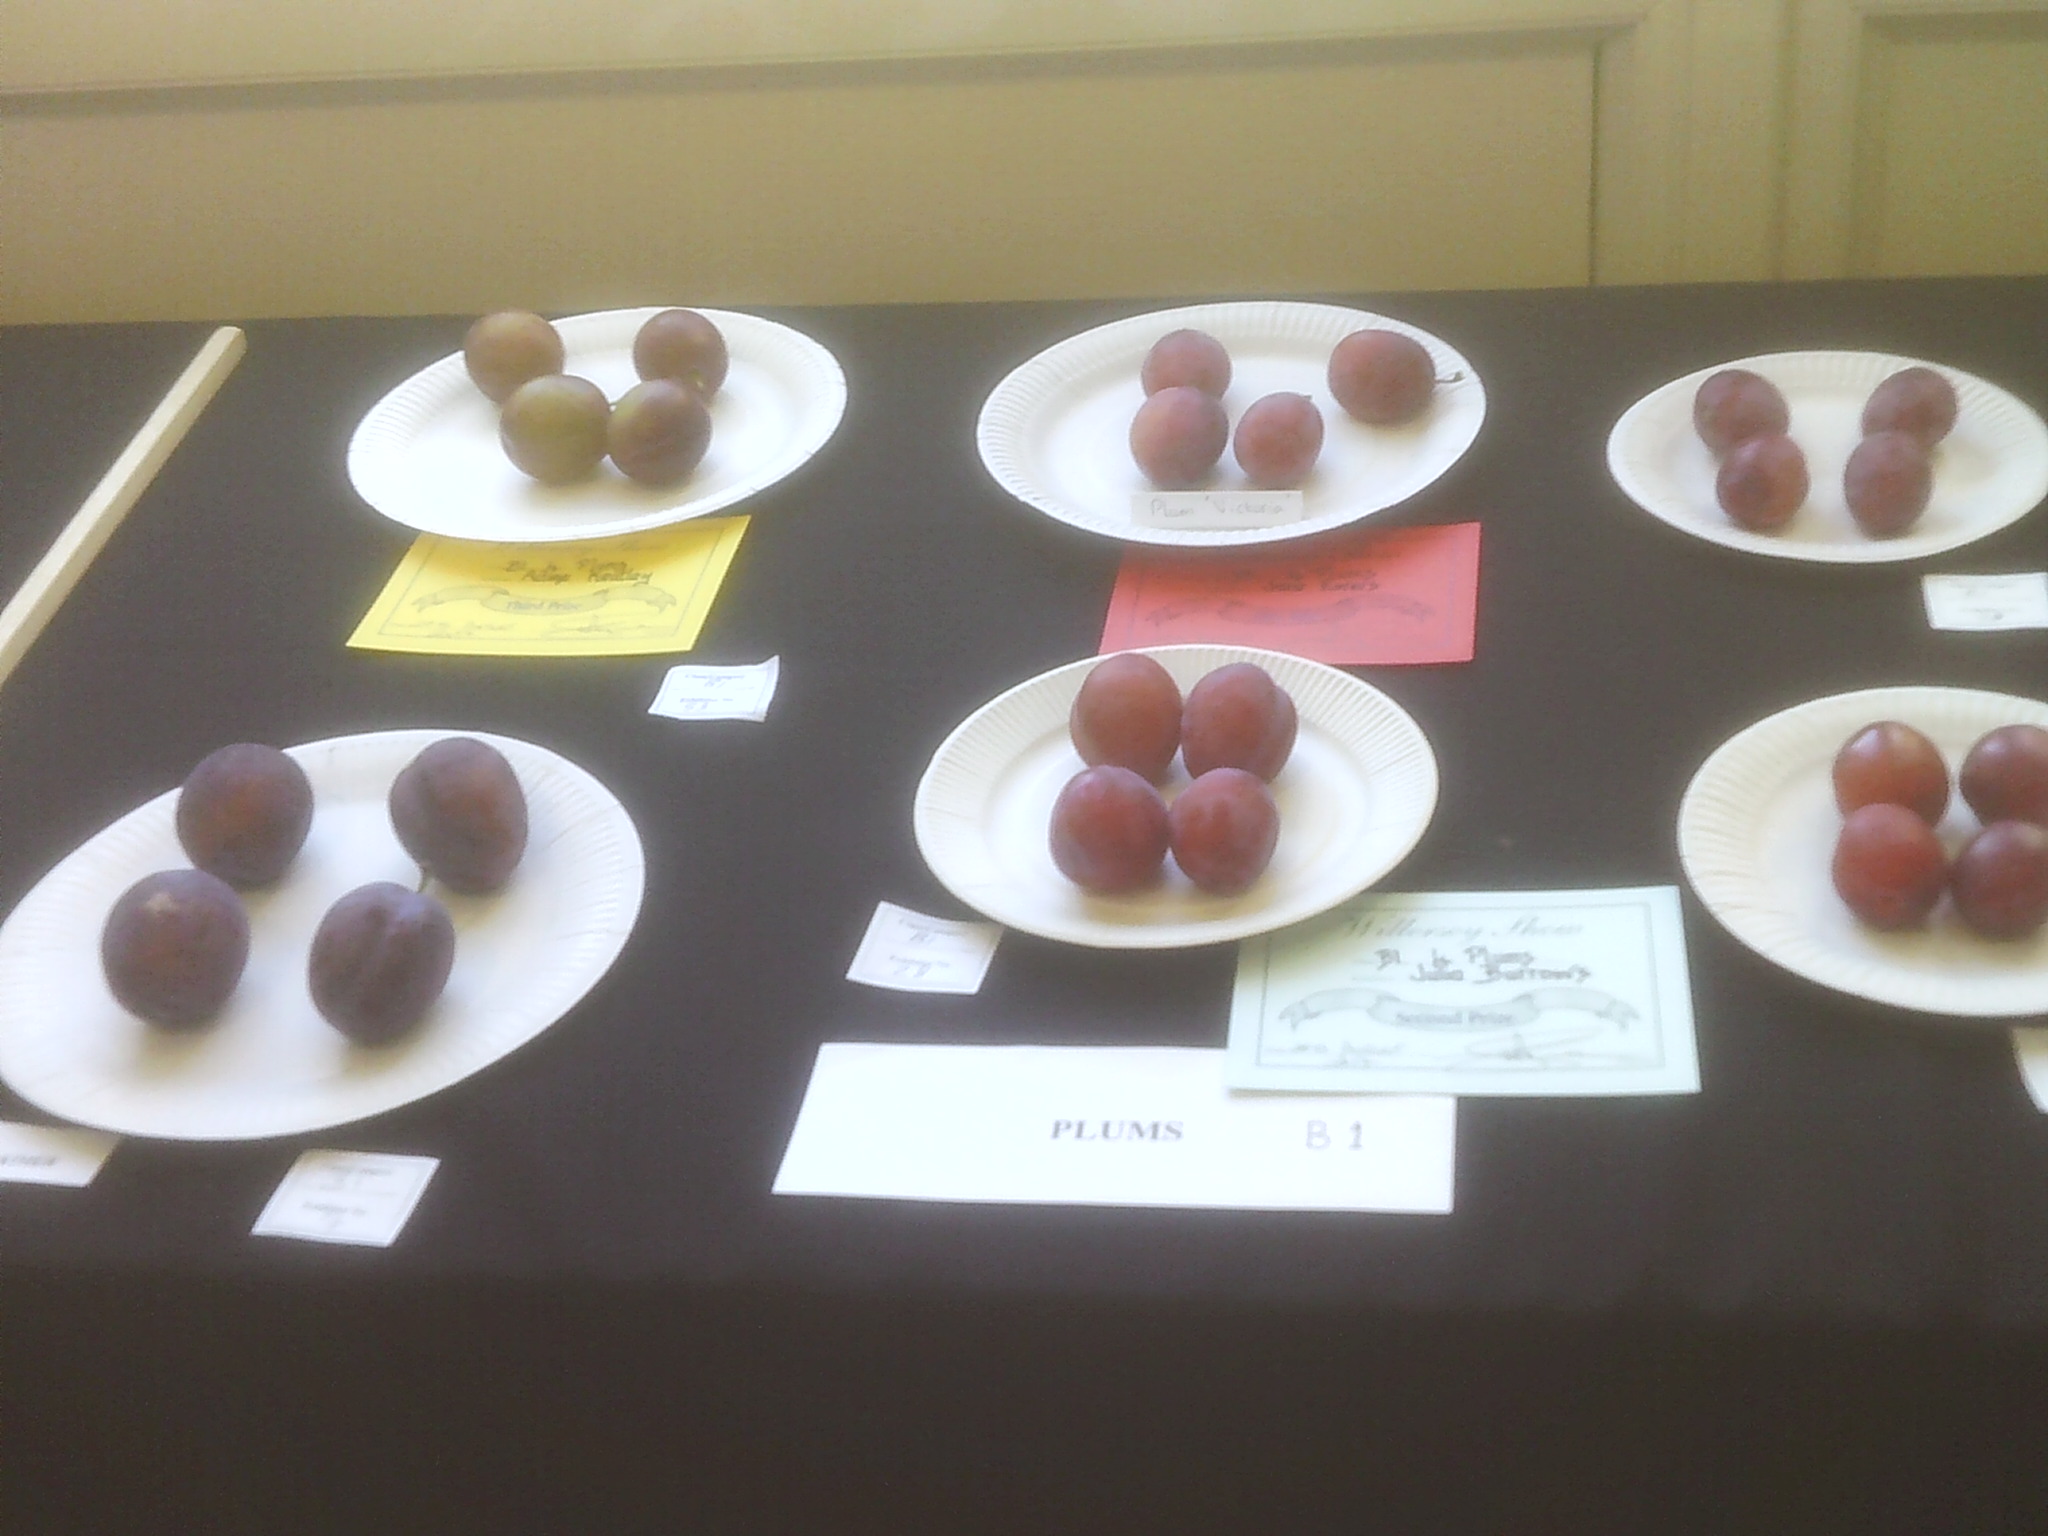 Plums at Willersey Horticultural Show